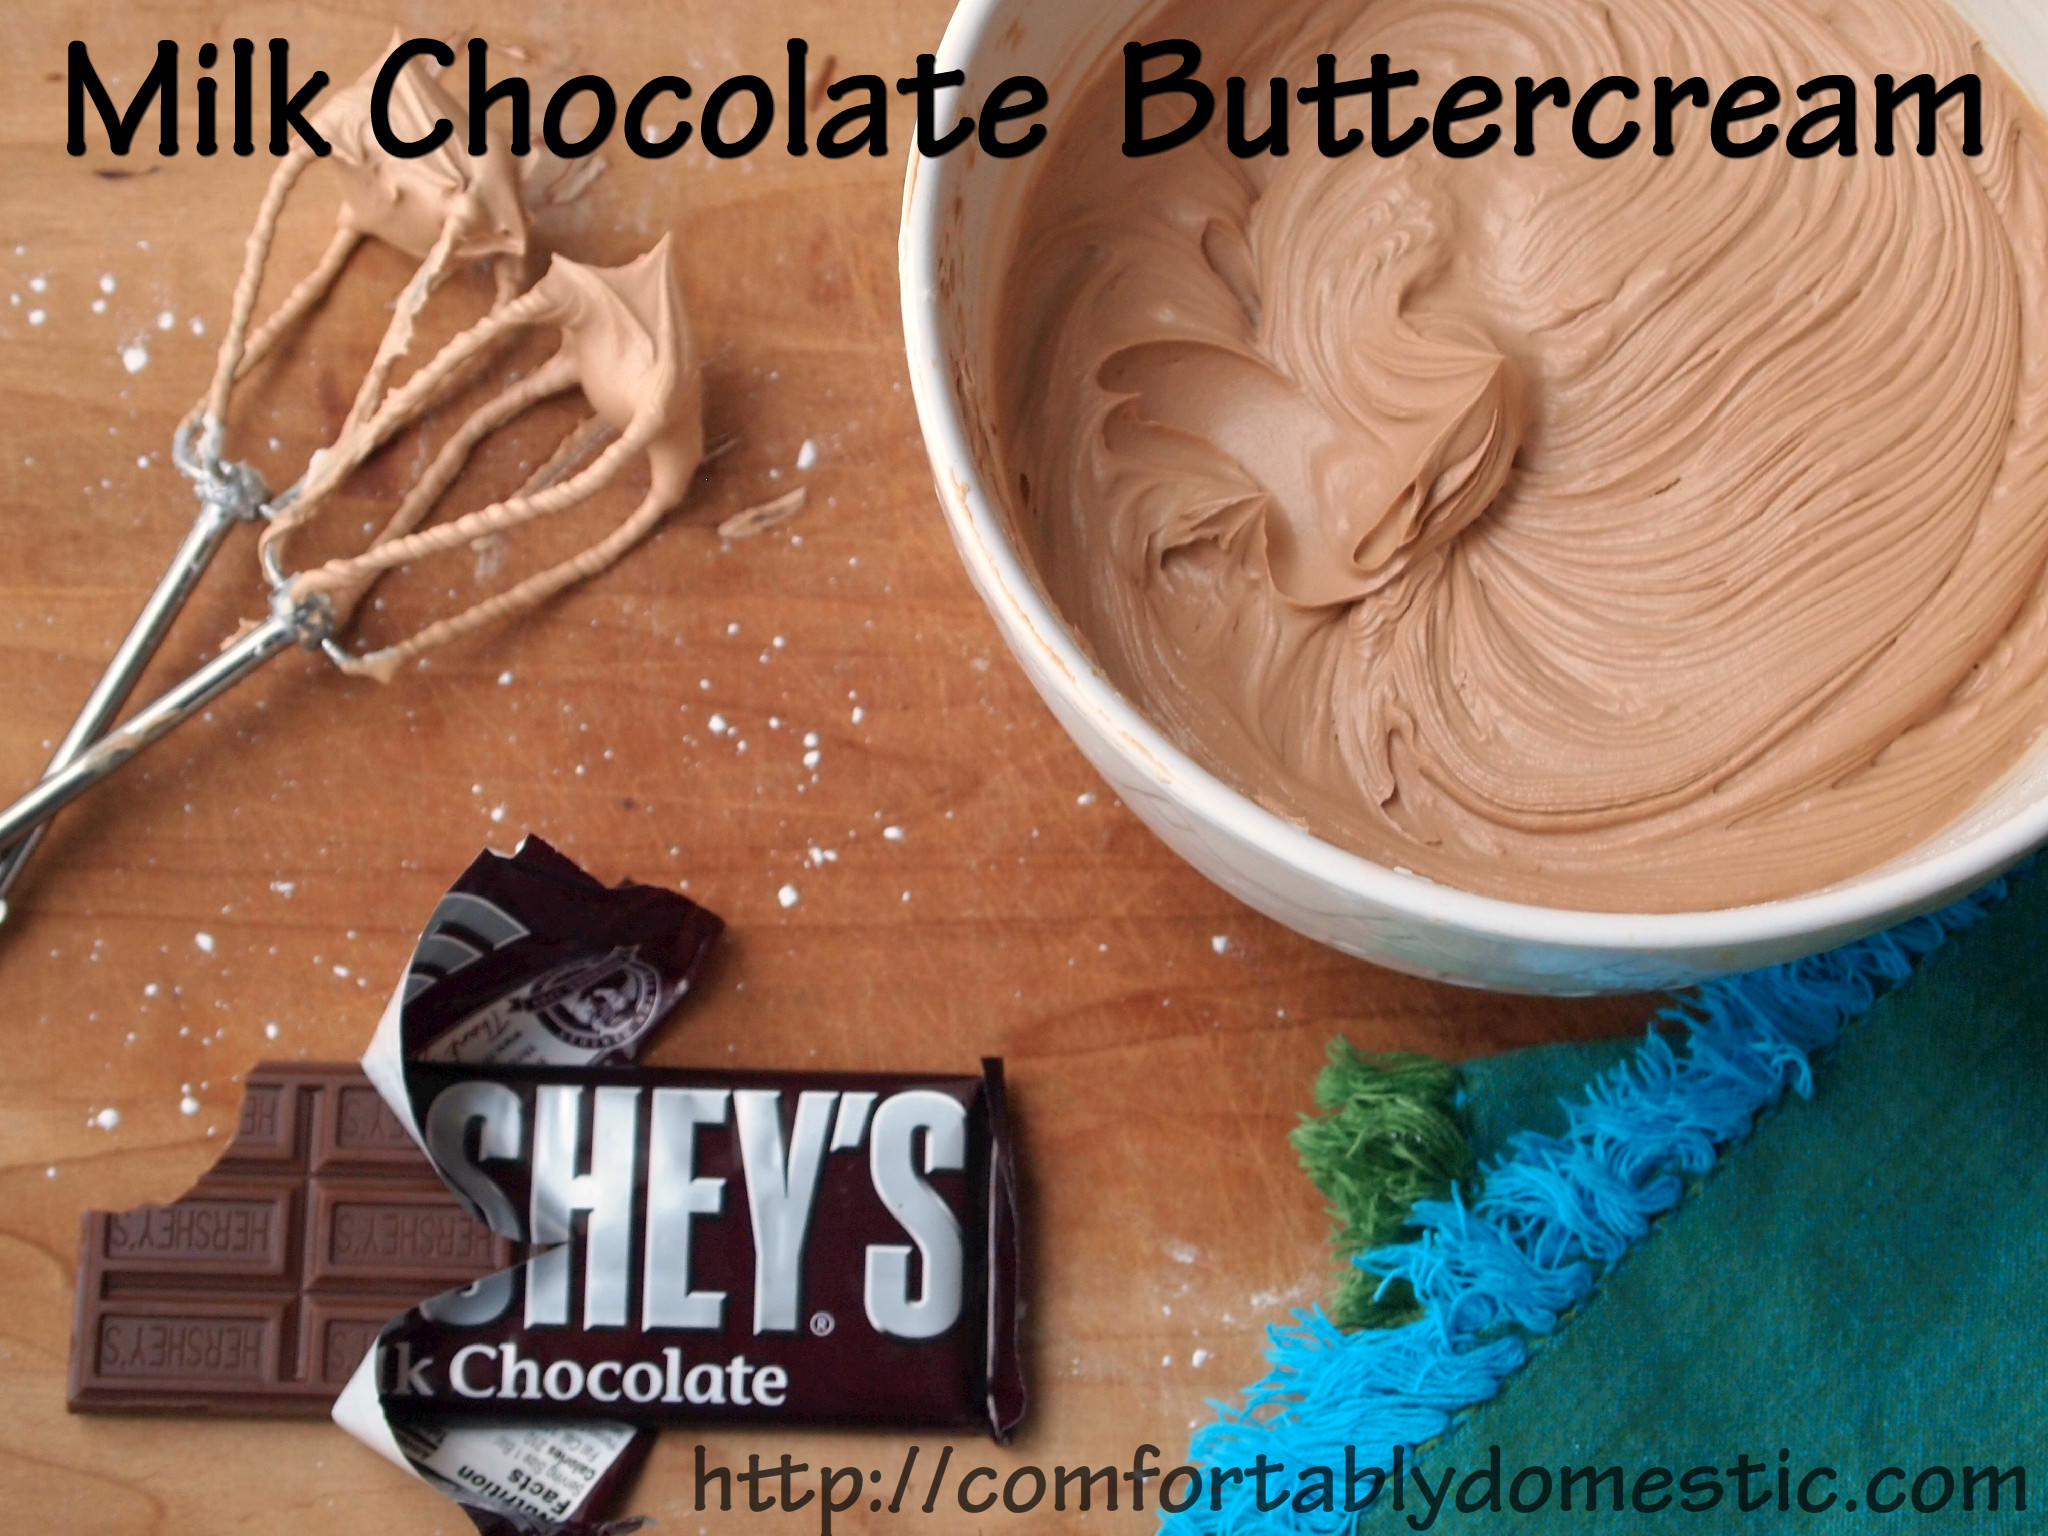 Milk Chocolate Buttercream Frosting Recipe - So good, you might want to eat it straight from the spoon! \\ Recipe on ComfortablyDomestic.com